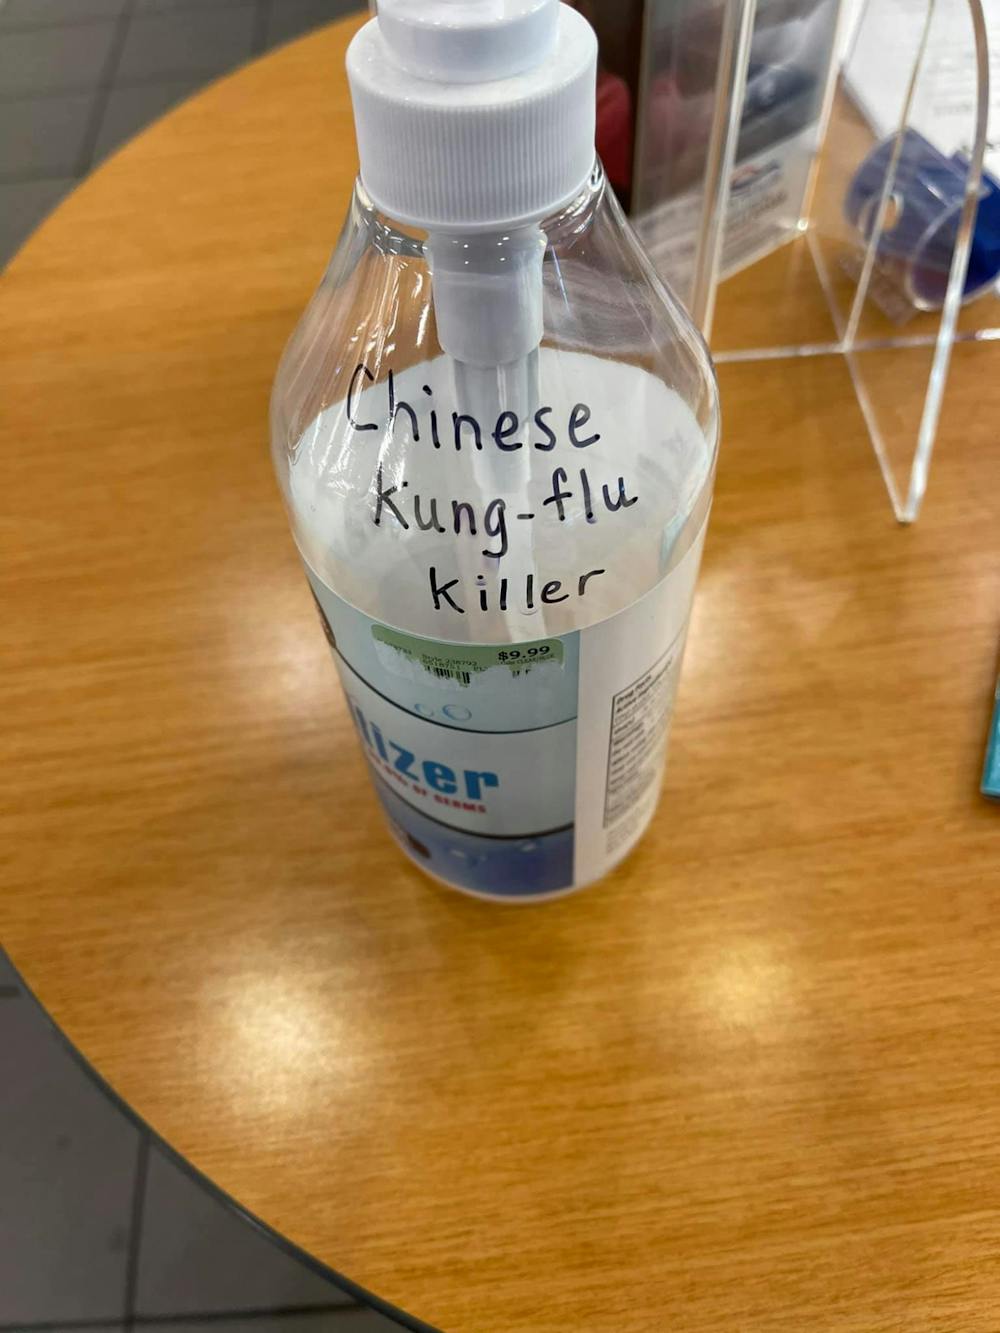 Gainesville Nissan customer Larry Katz found a sanitizer bottle with the racist message, "Chinese Kung-flu Killer" written in black ink in the dealership storeroom. [Photo courtesy of Larry Katz.]